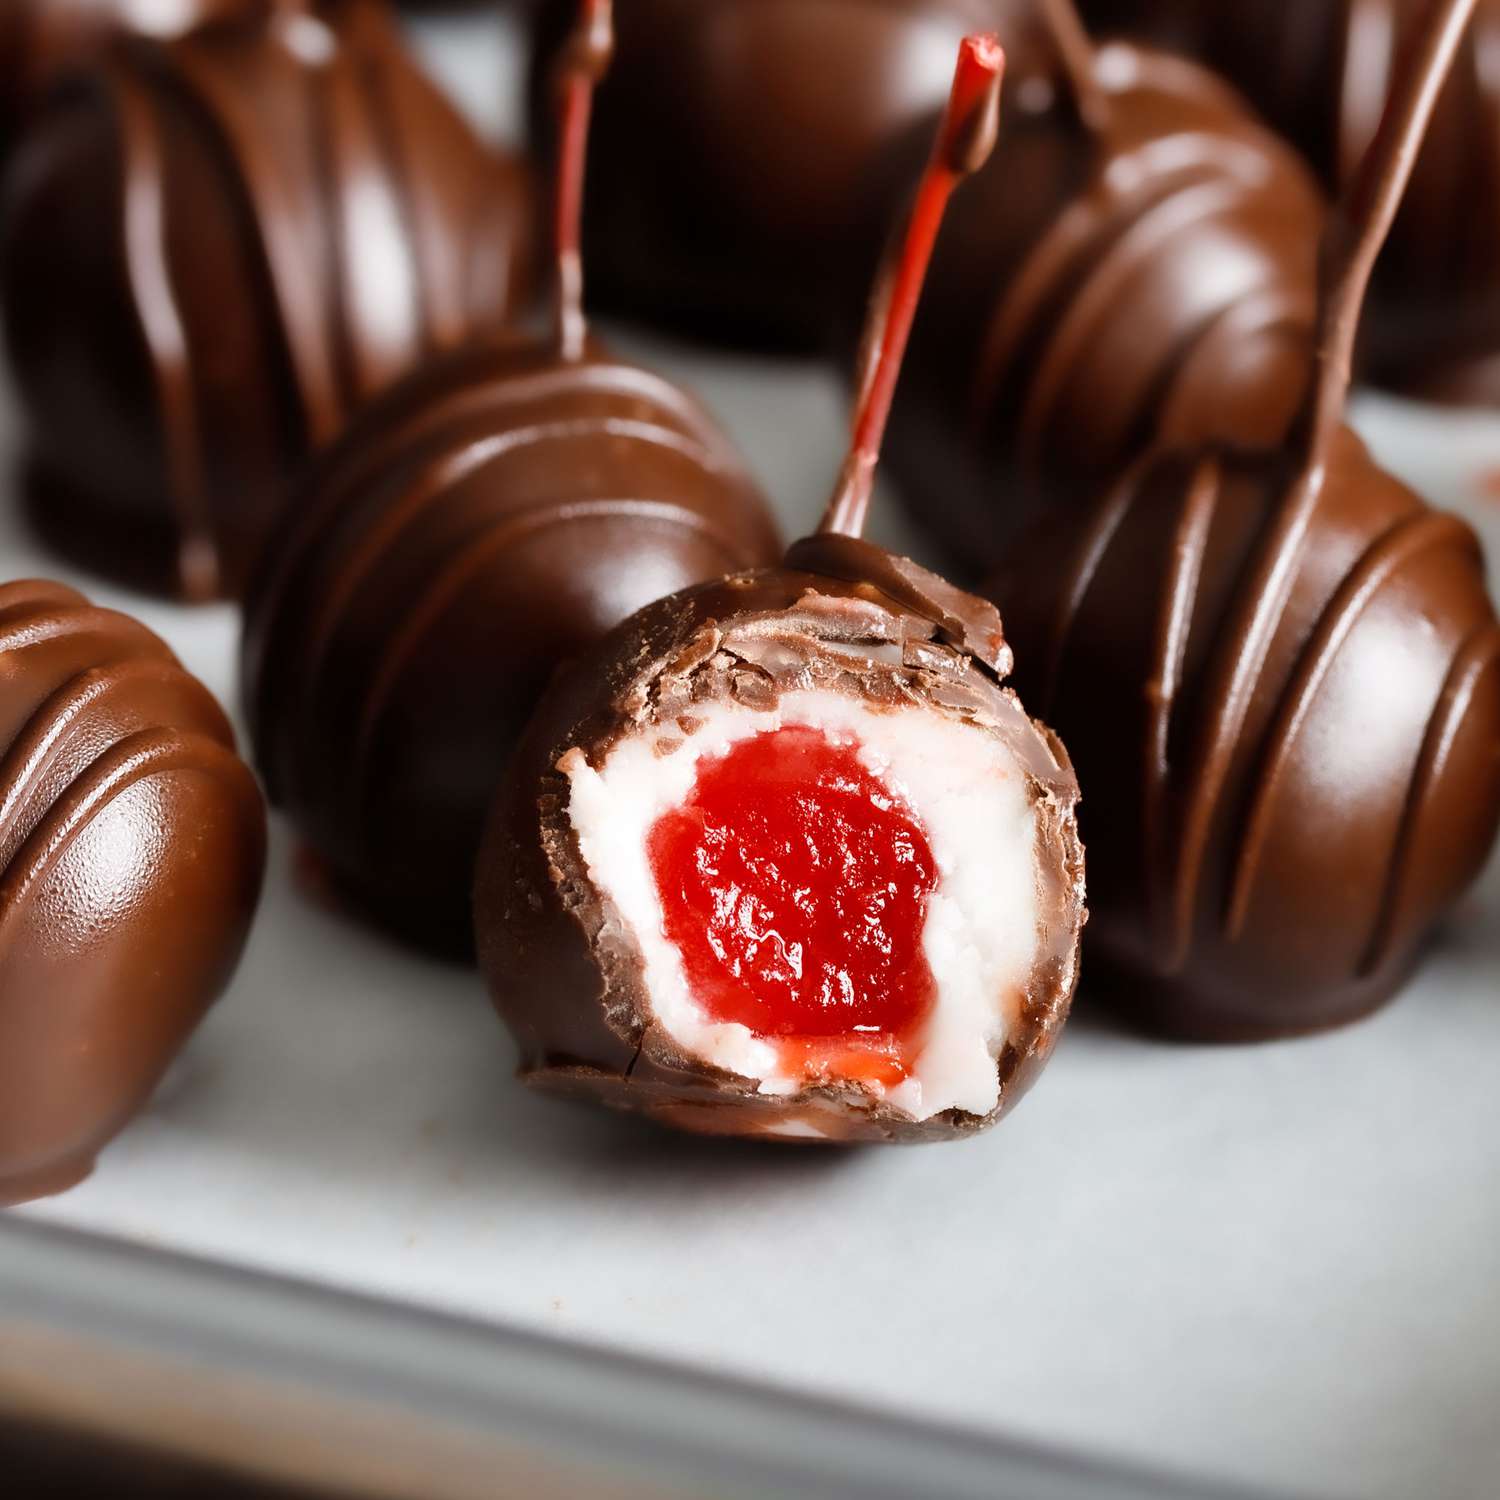 a close up view of several chocolate covered cherries chilling on a parchment lined baking sheet with one cut open revealing the creamy center wrapped around a bright red cherry.